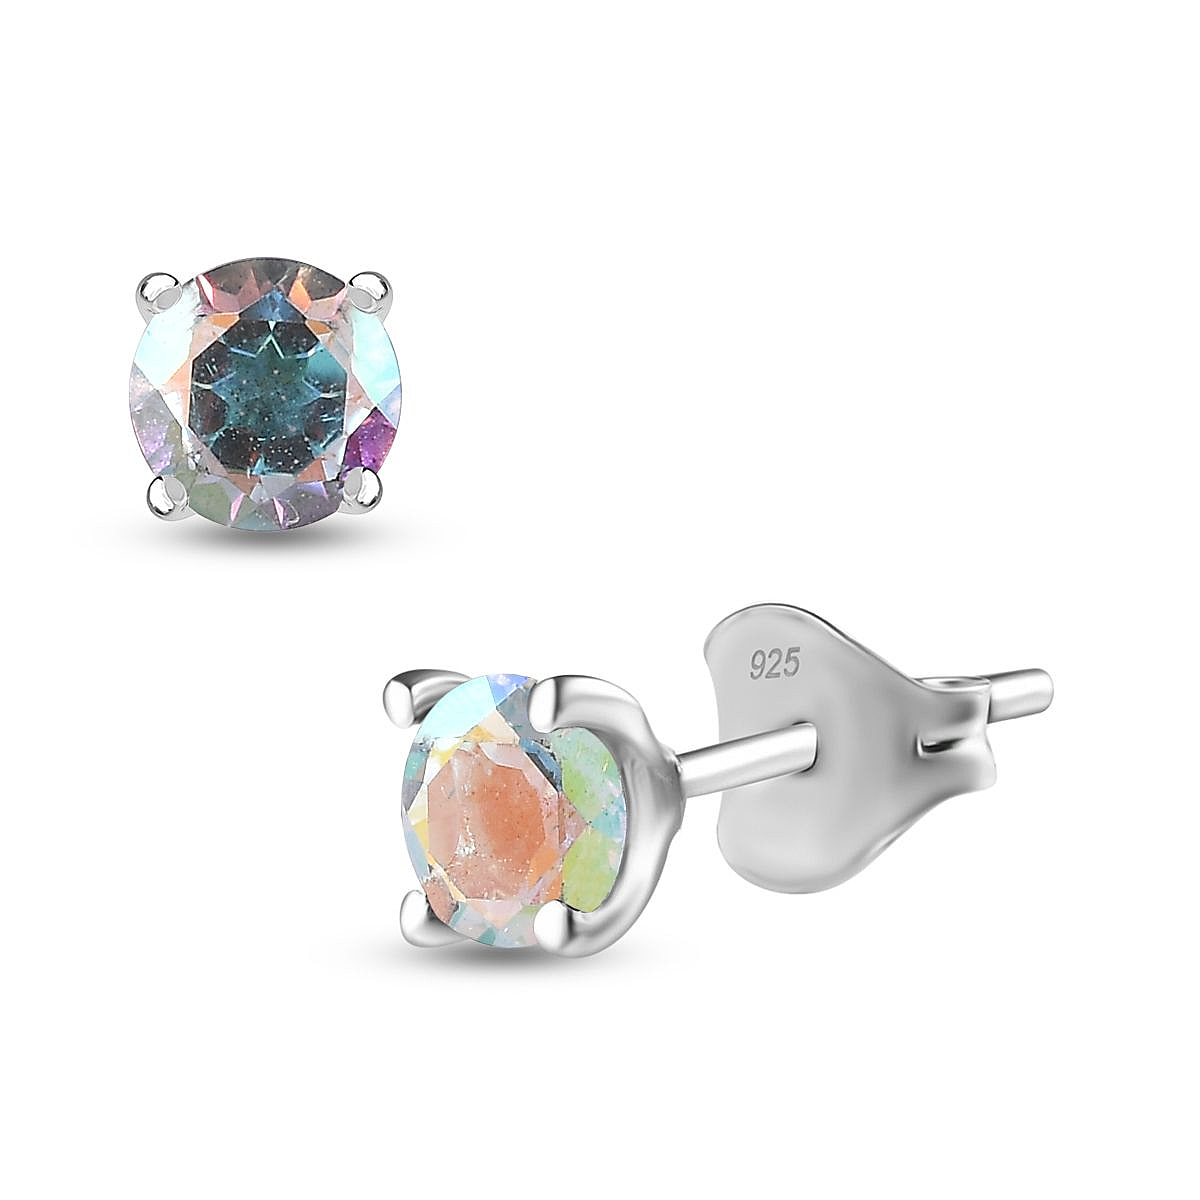 One Time Closeout Mercury Mystic Topaz Solitaire Stud Earrings in Platinum  Overlay Sterling Silver 1.20 Ct